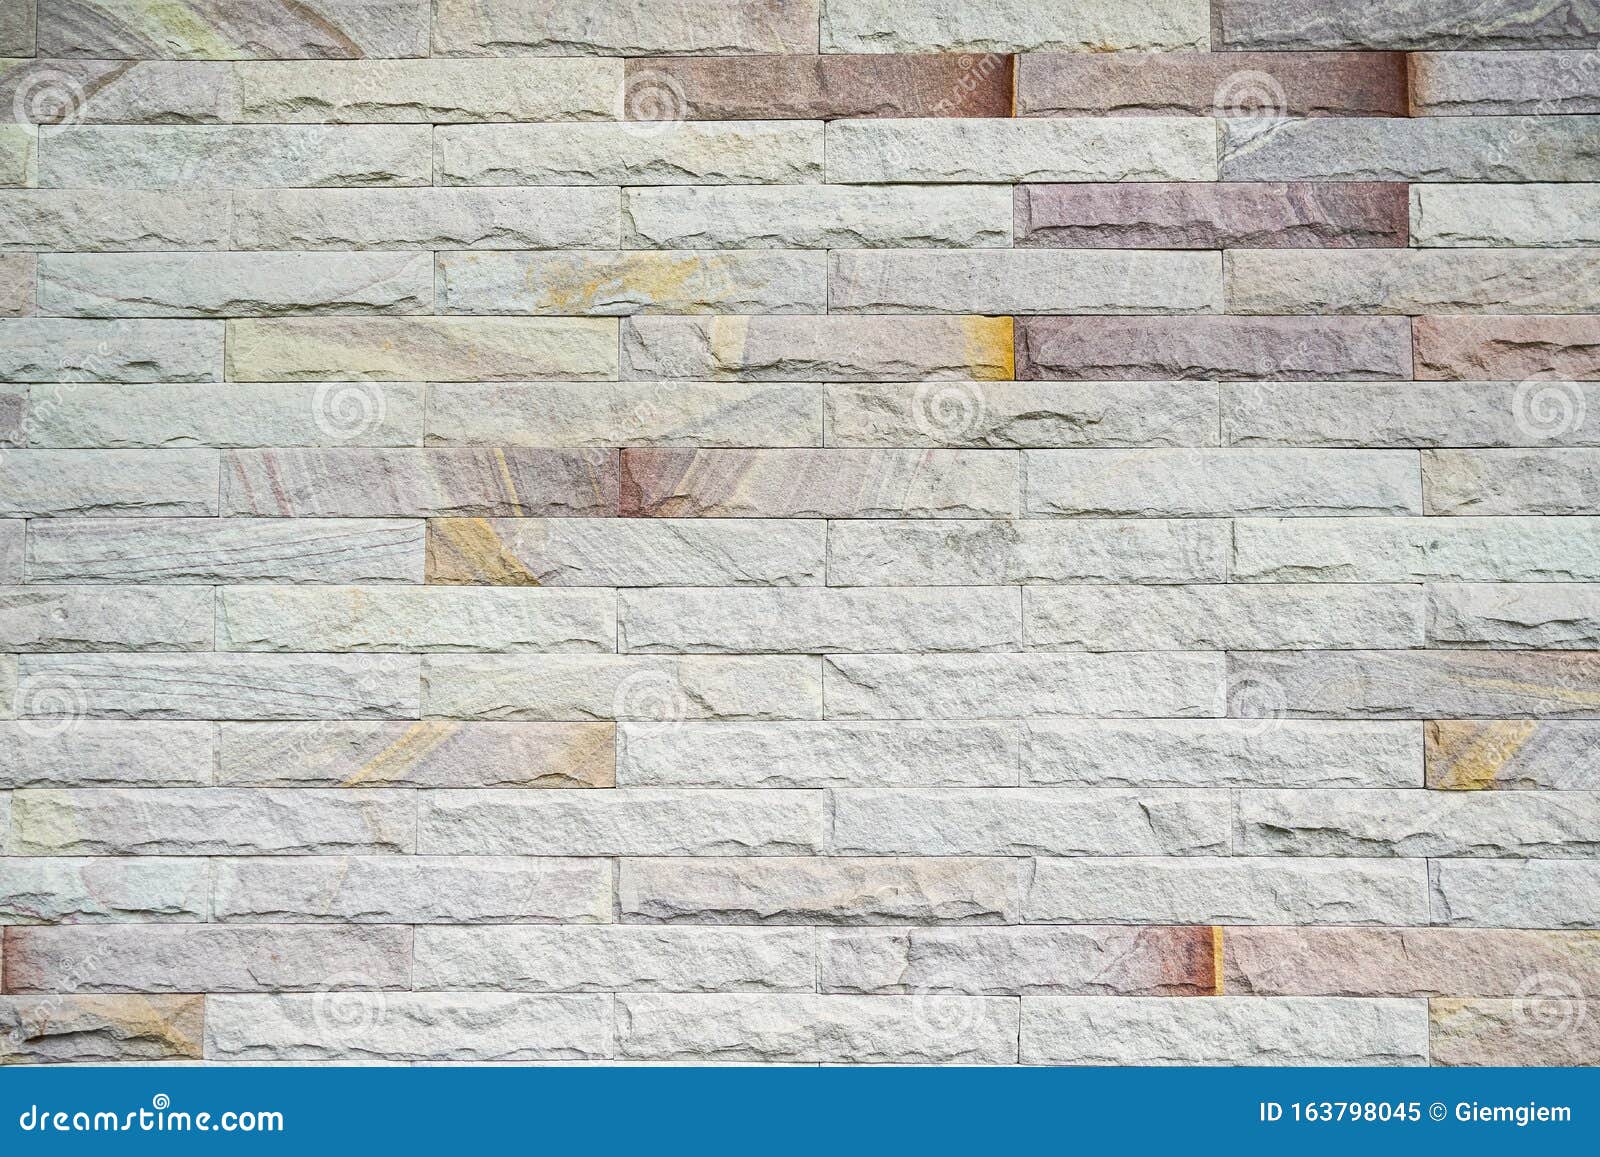  Beige  Brick  Wall  Background Texture  Home And Office 